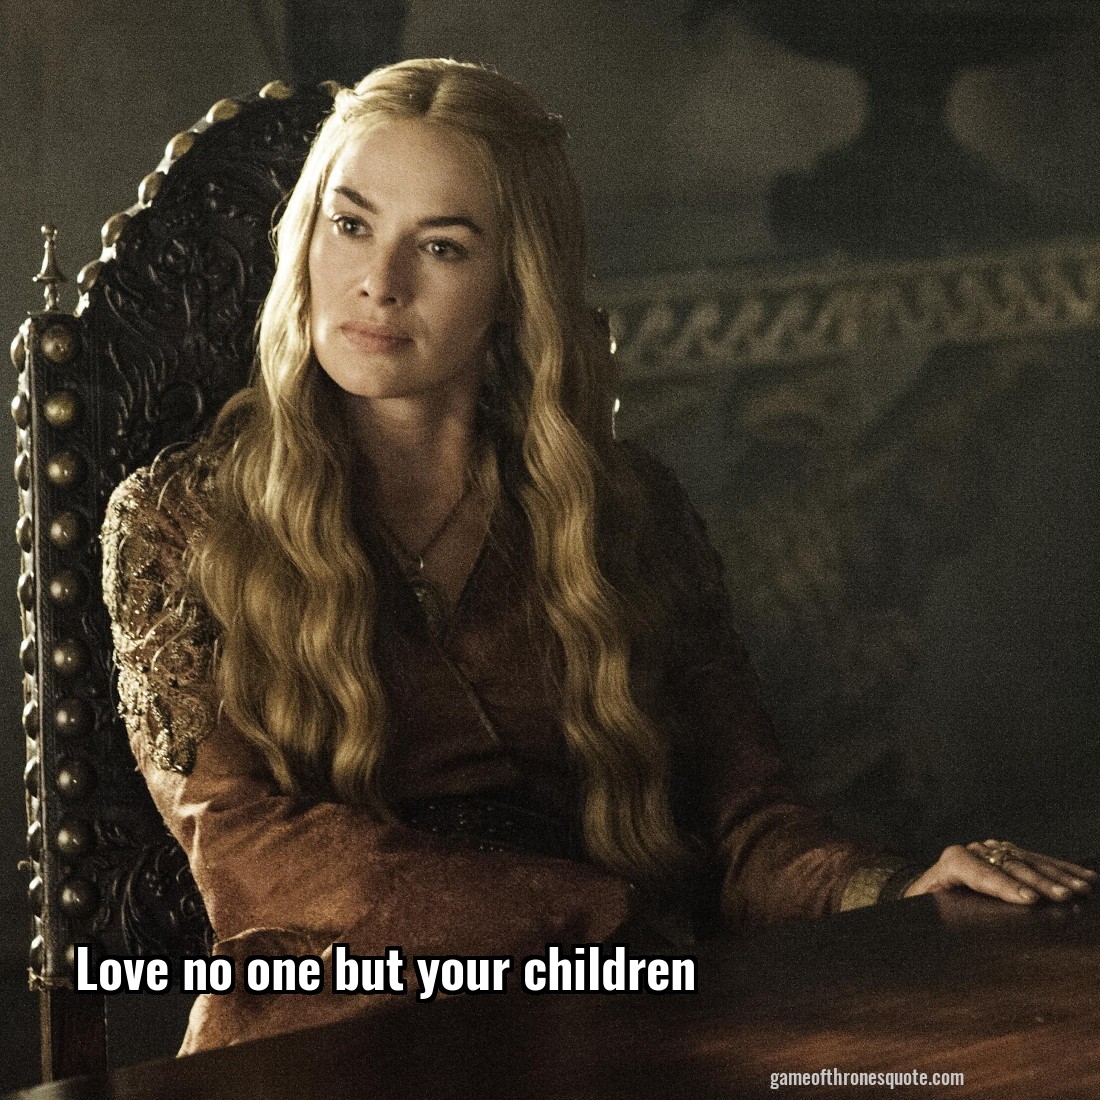 Love no one but your children